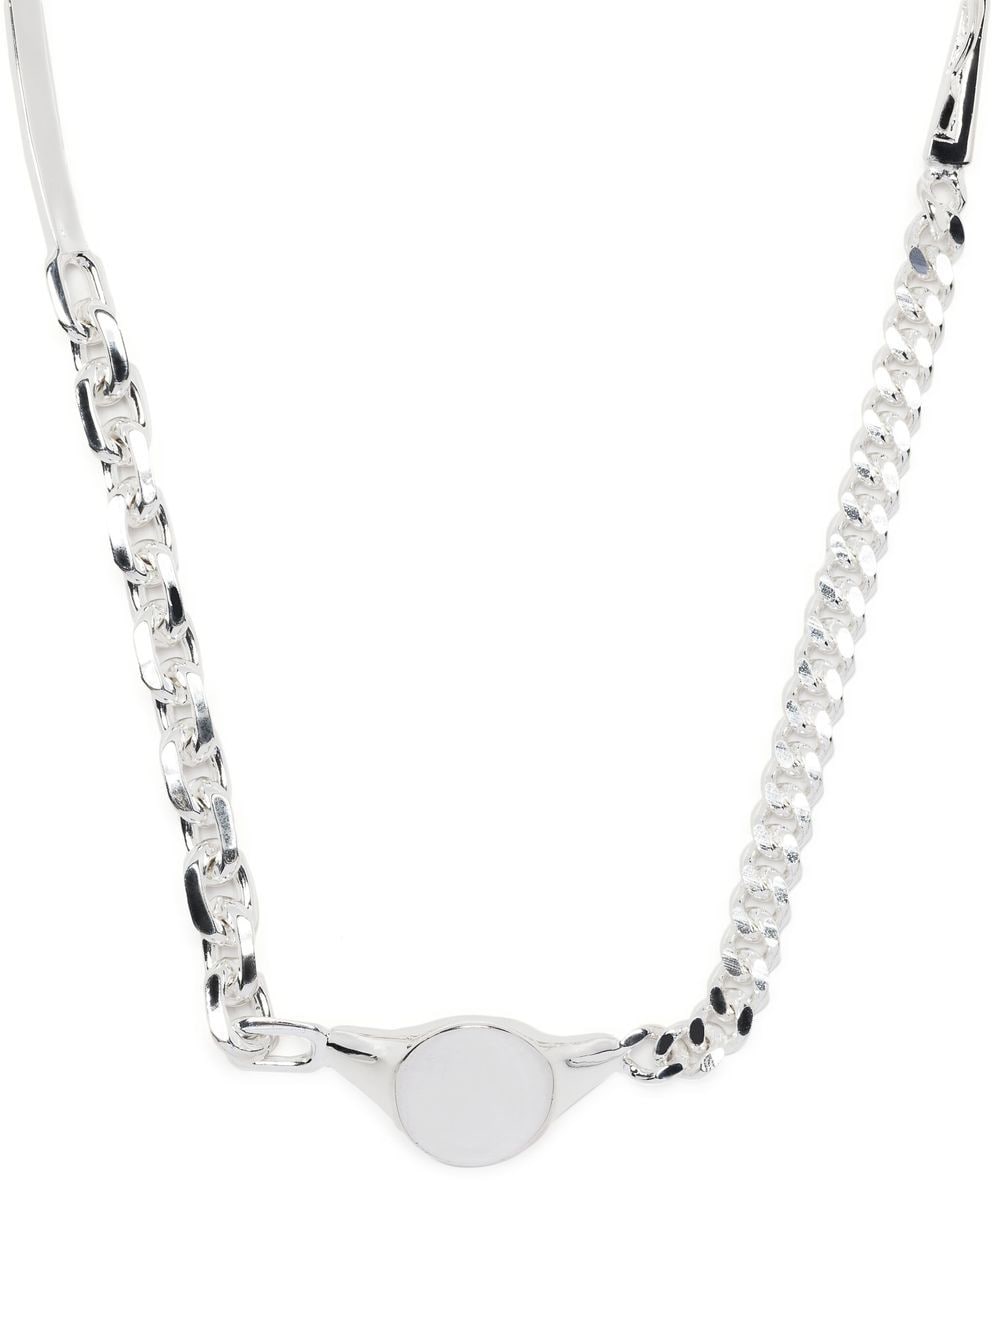 SWEETLIMEJUICE mixed-chain necklace - Silver von SWEETLIMEJUICE